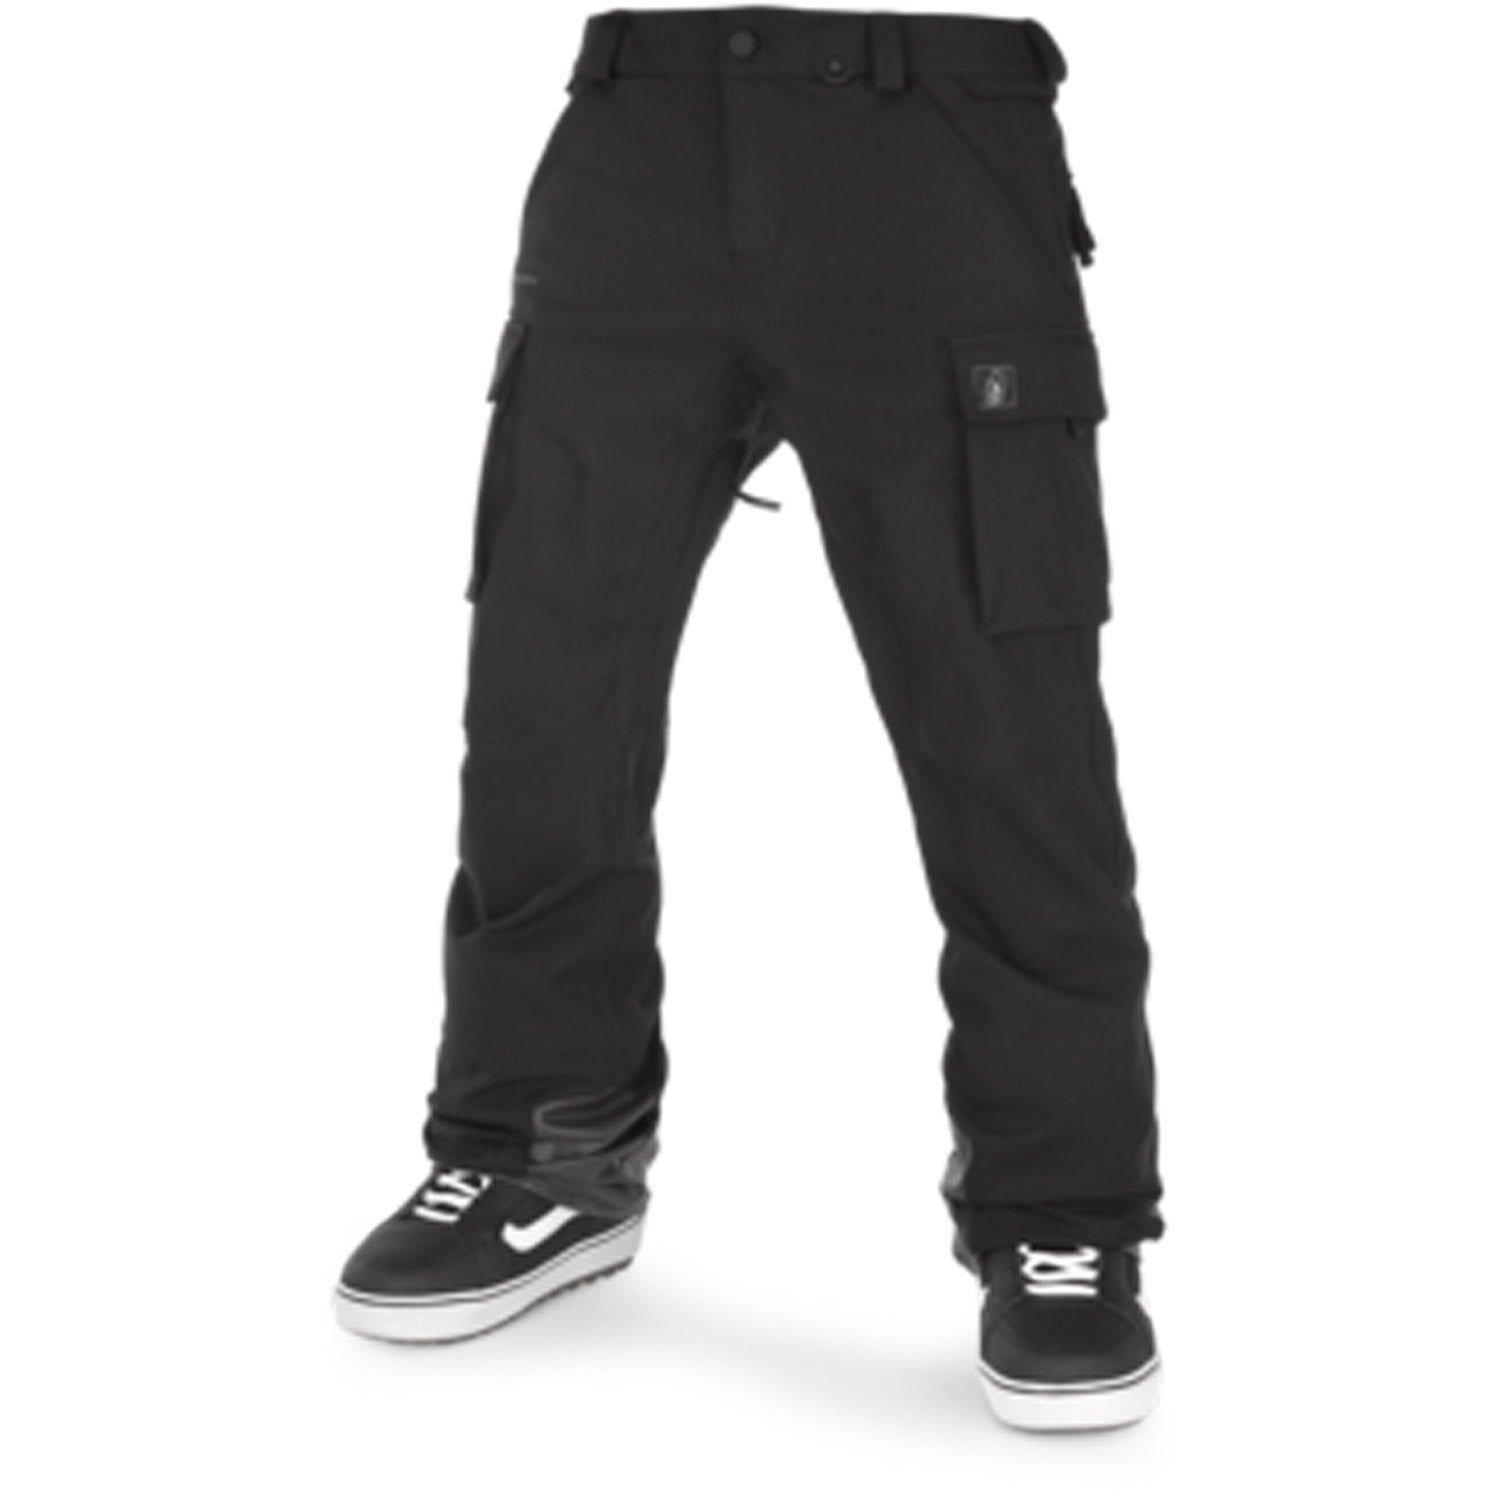 Men's New Articulated Pants